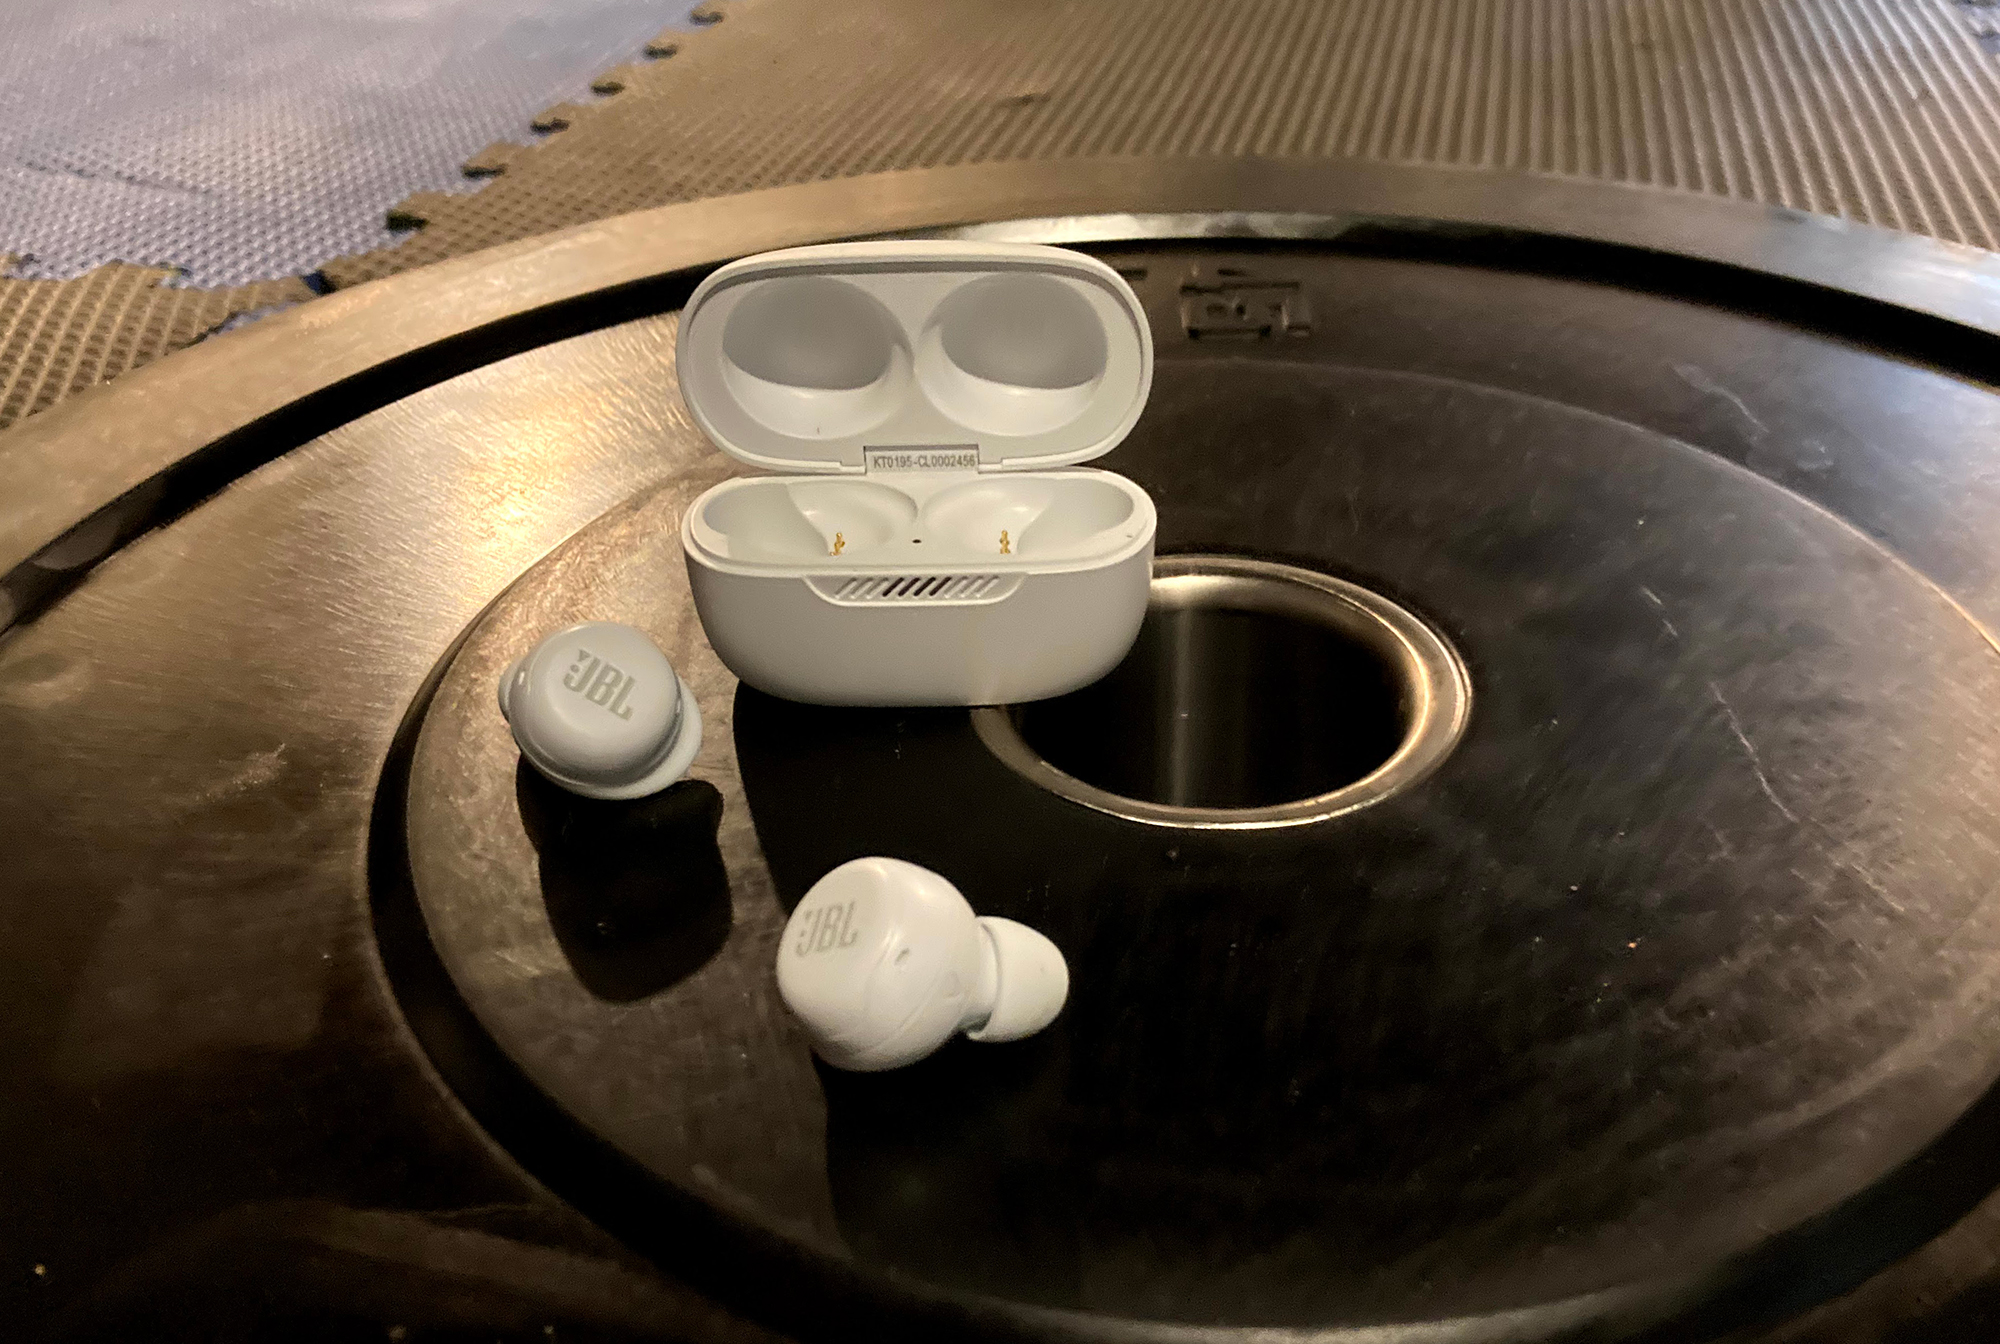 JBL Live Free NC+ TWS earbuds review: Made for active listening